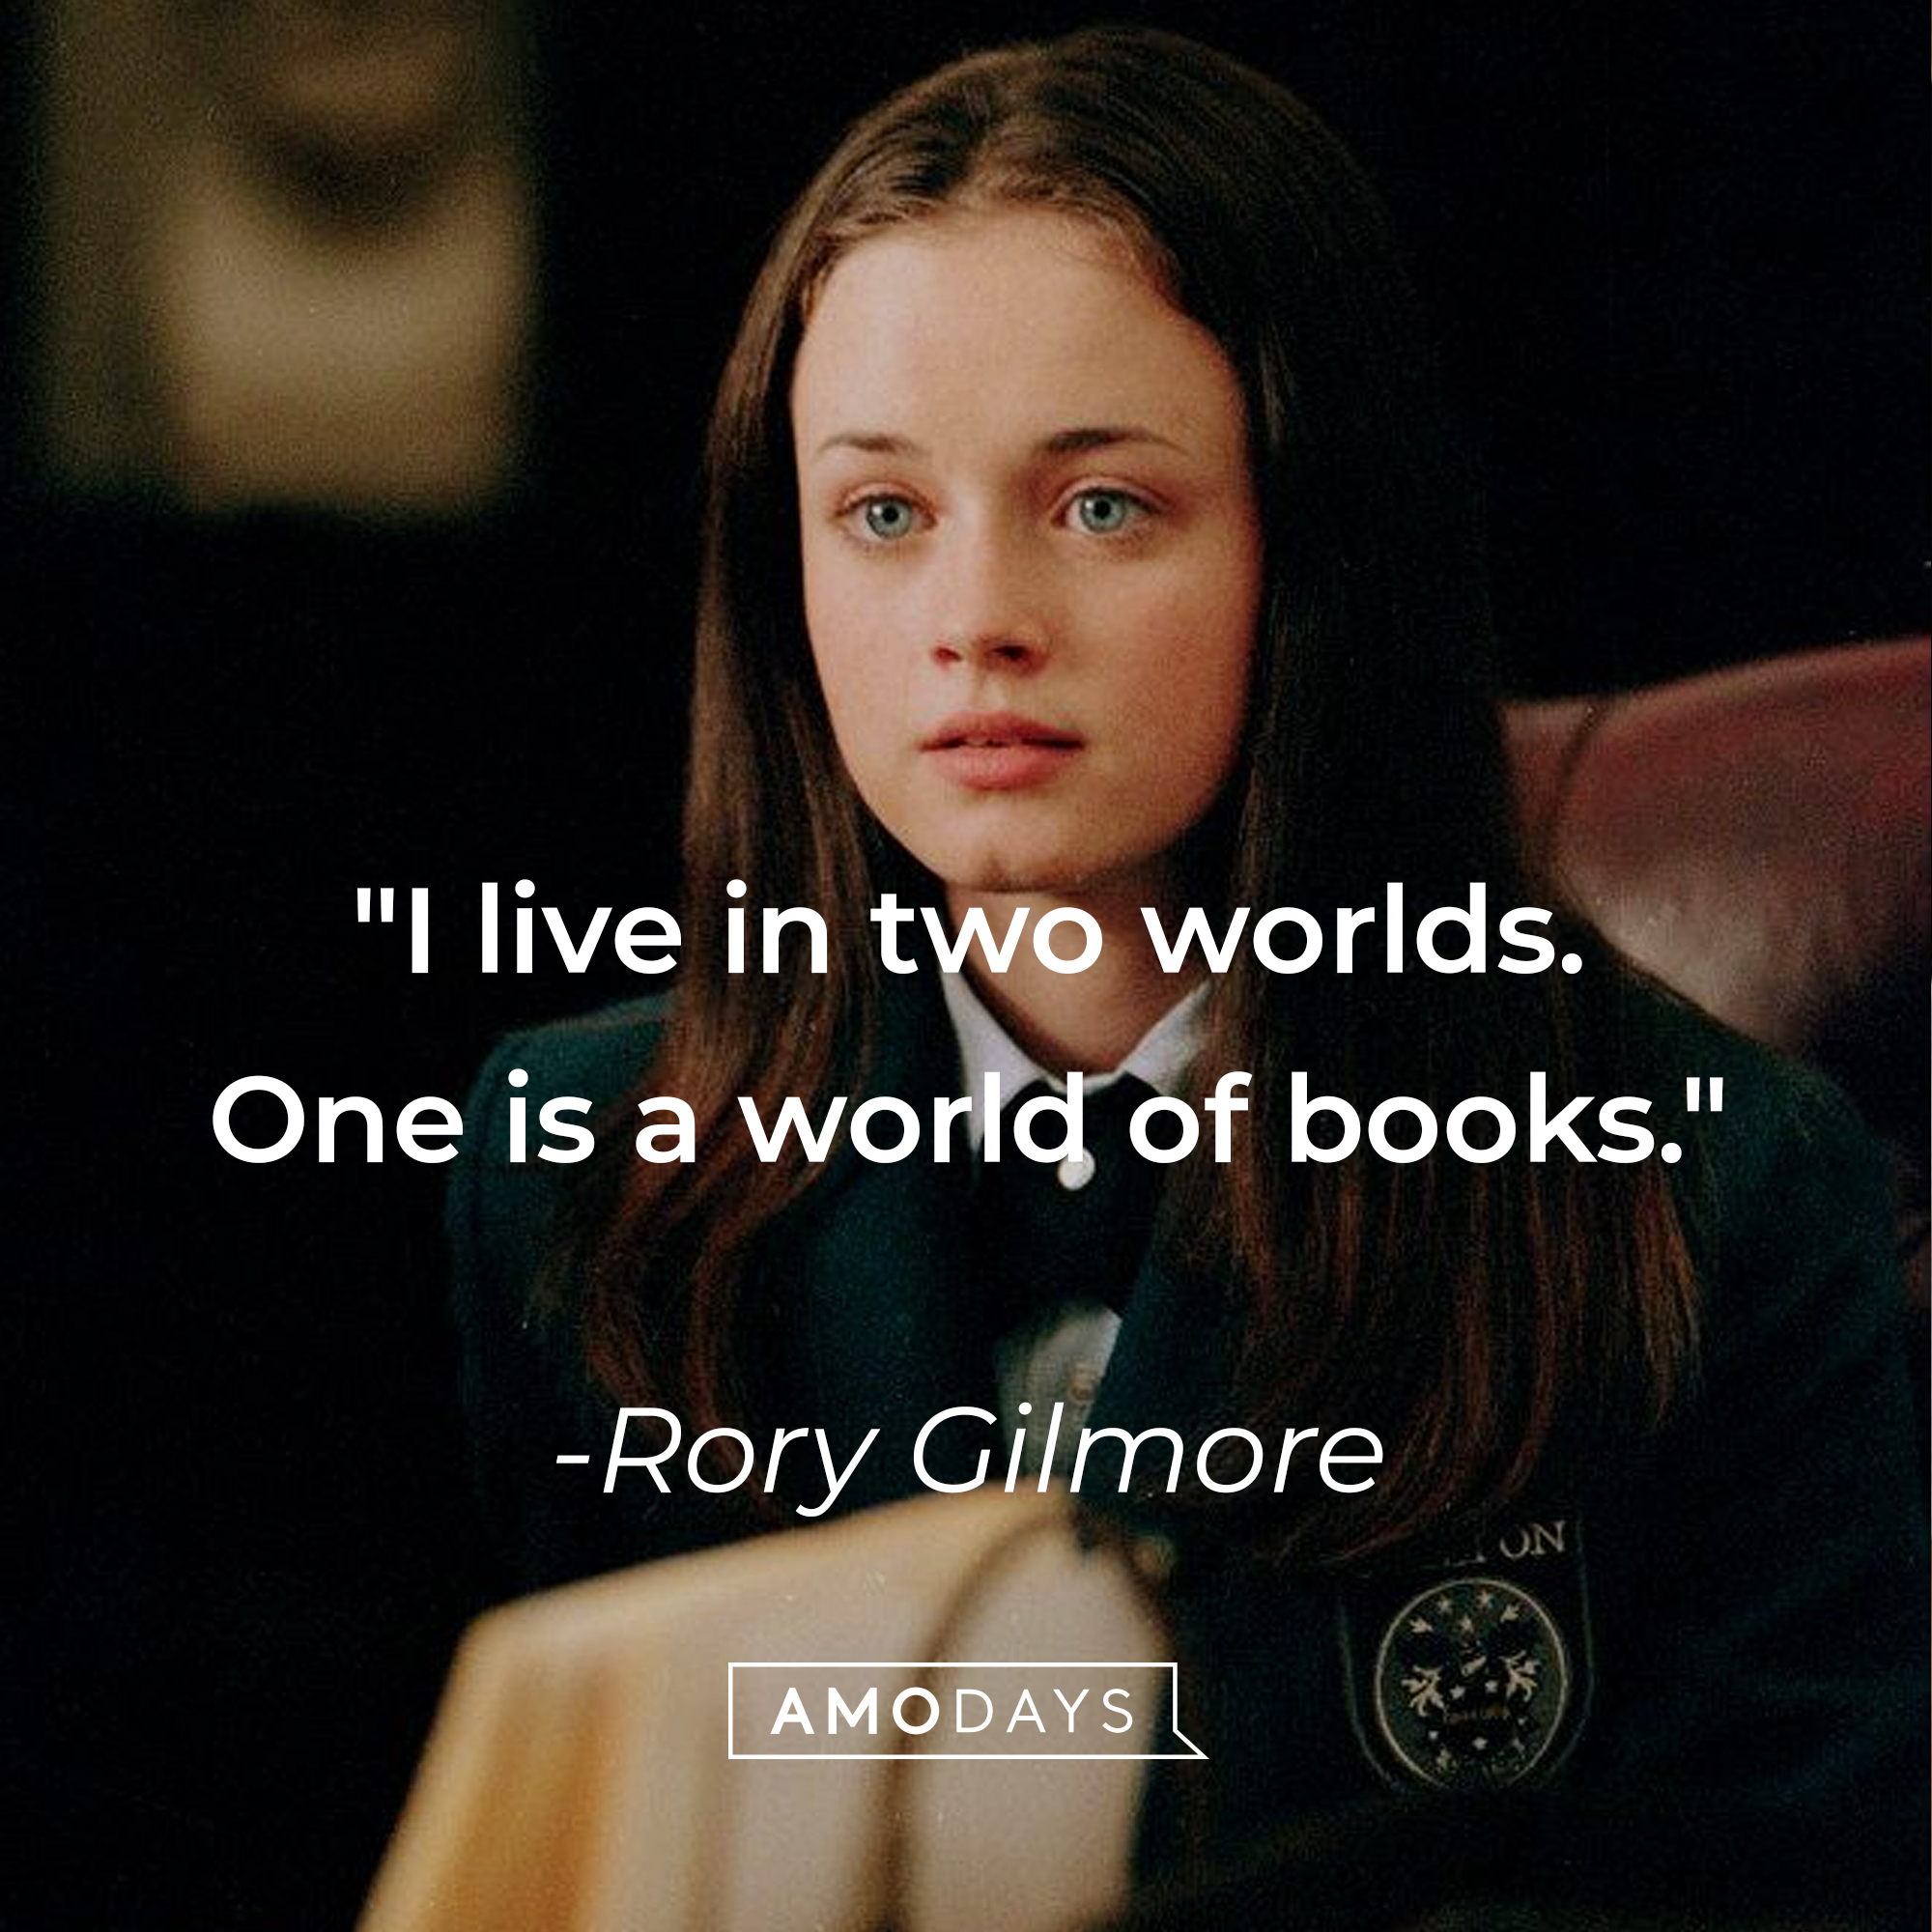 Rory Gilmore's quote: "I live in two worlds. One is a world of books." | Source: Facebook/GilmoreGirls